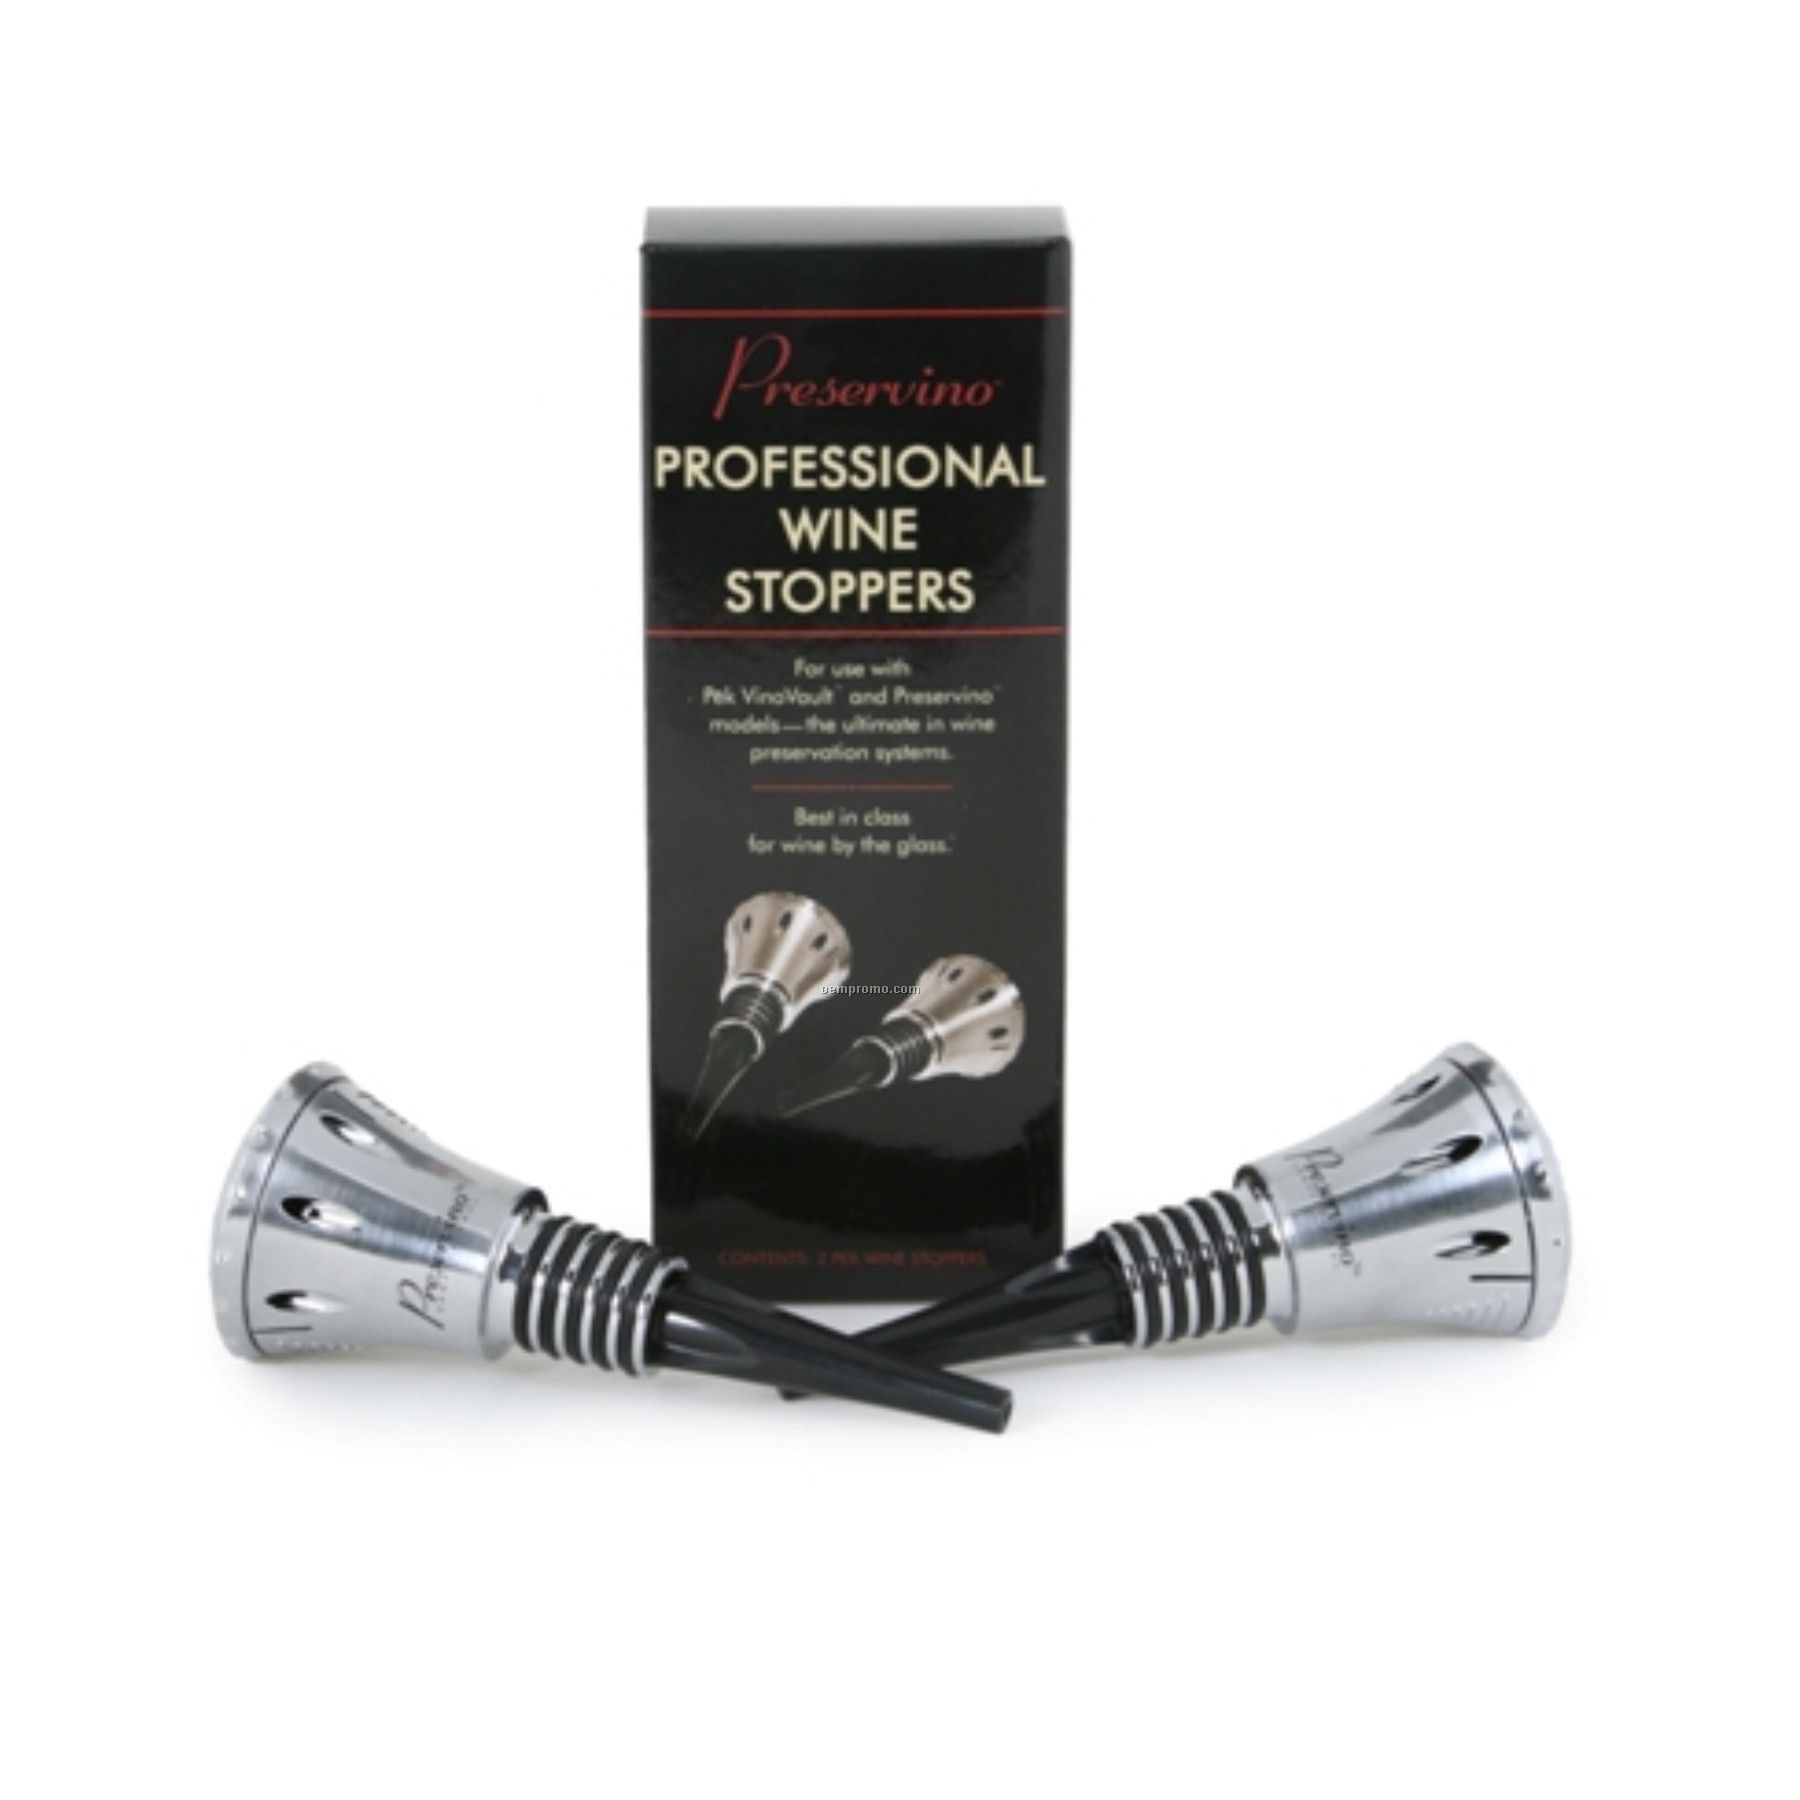 Preservino Professional Wine Stoppers (2 Pack)